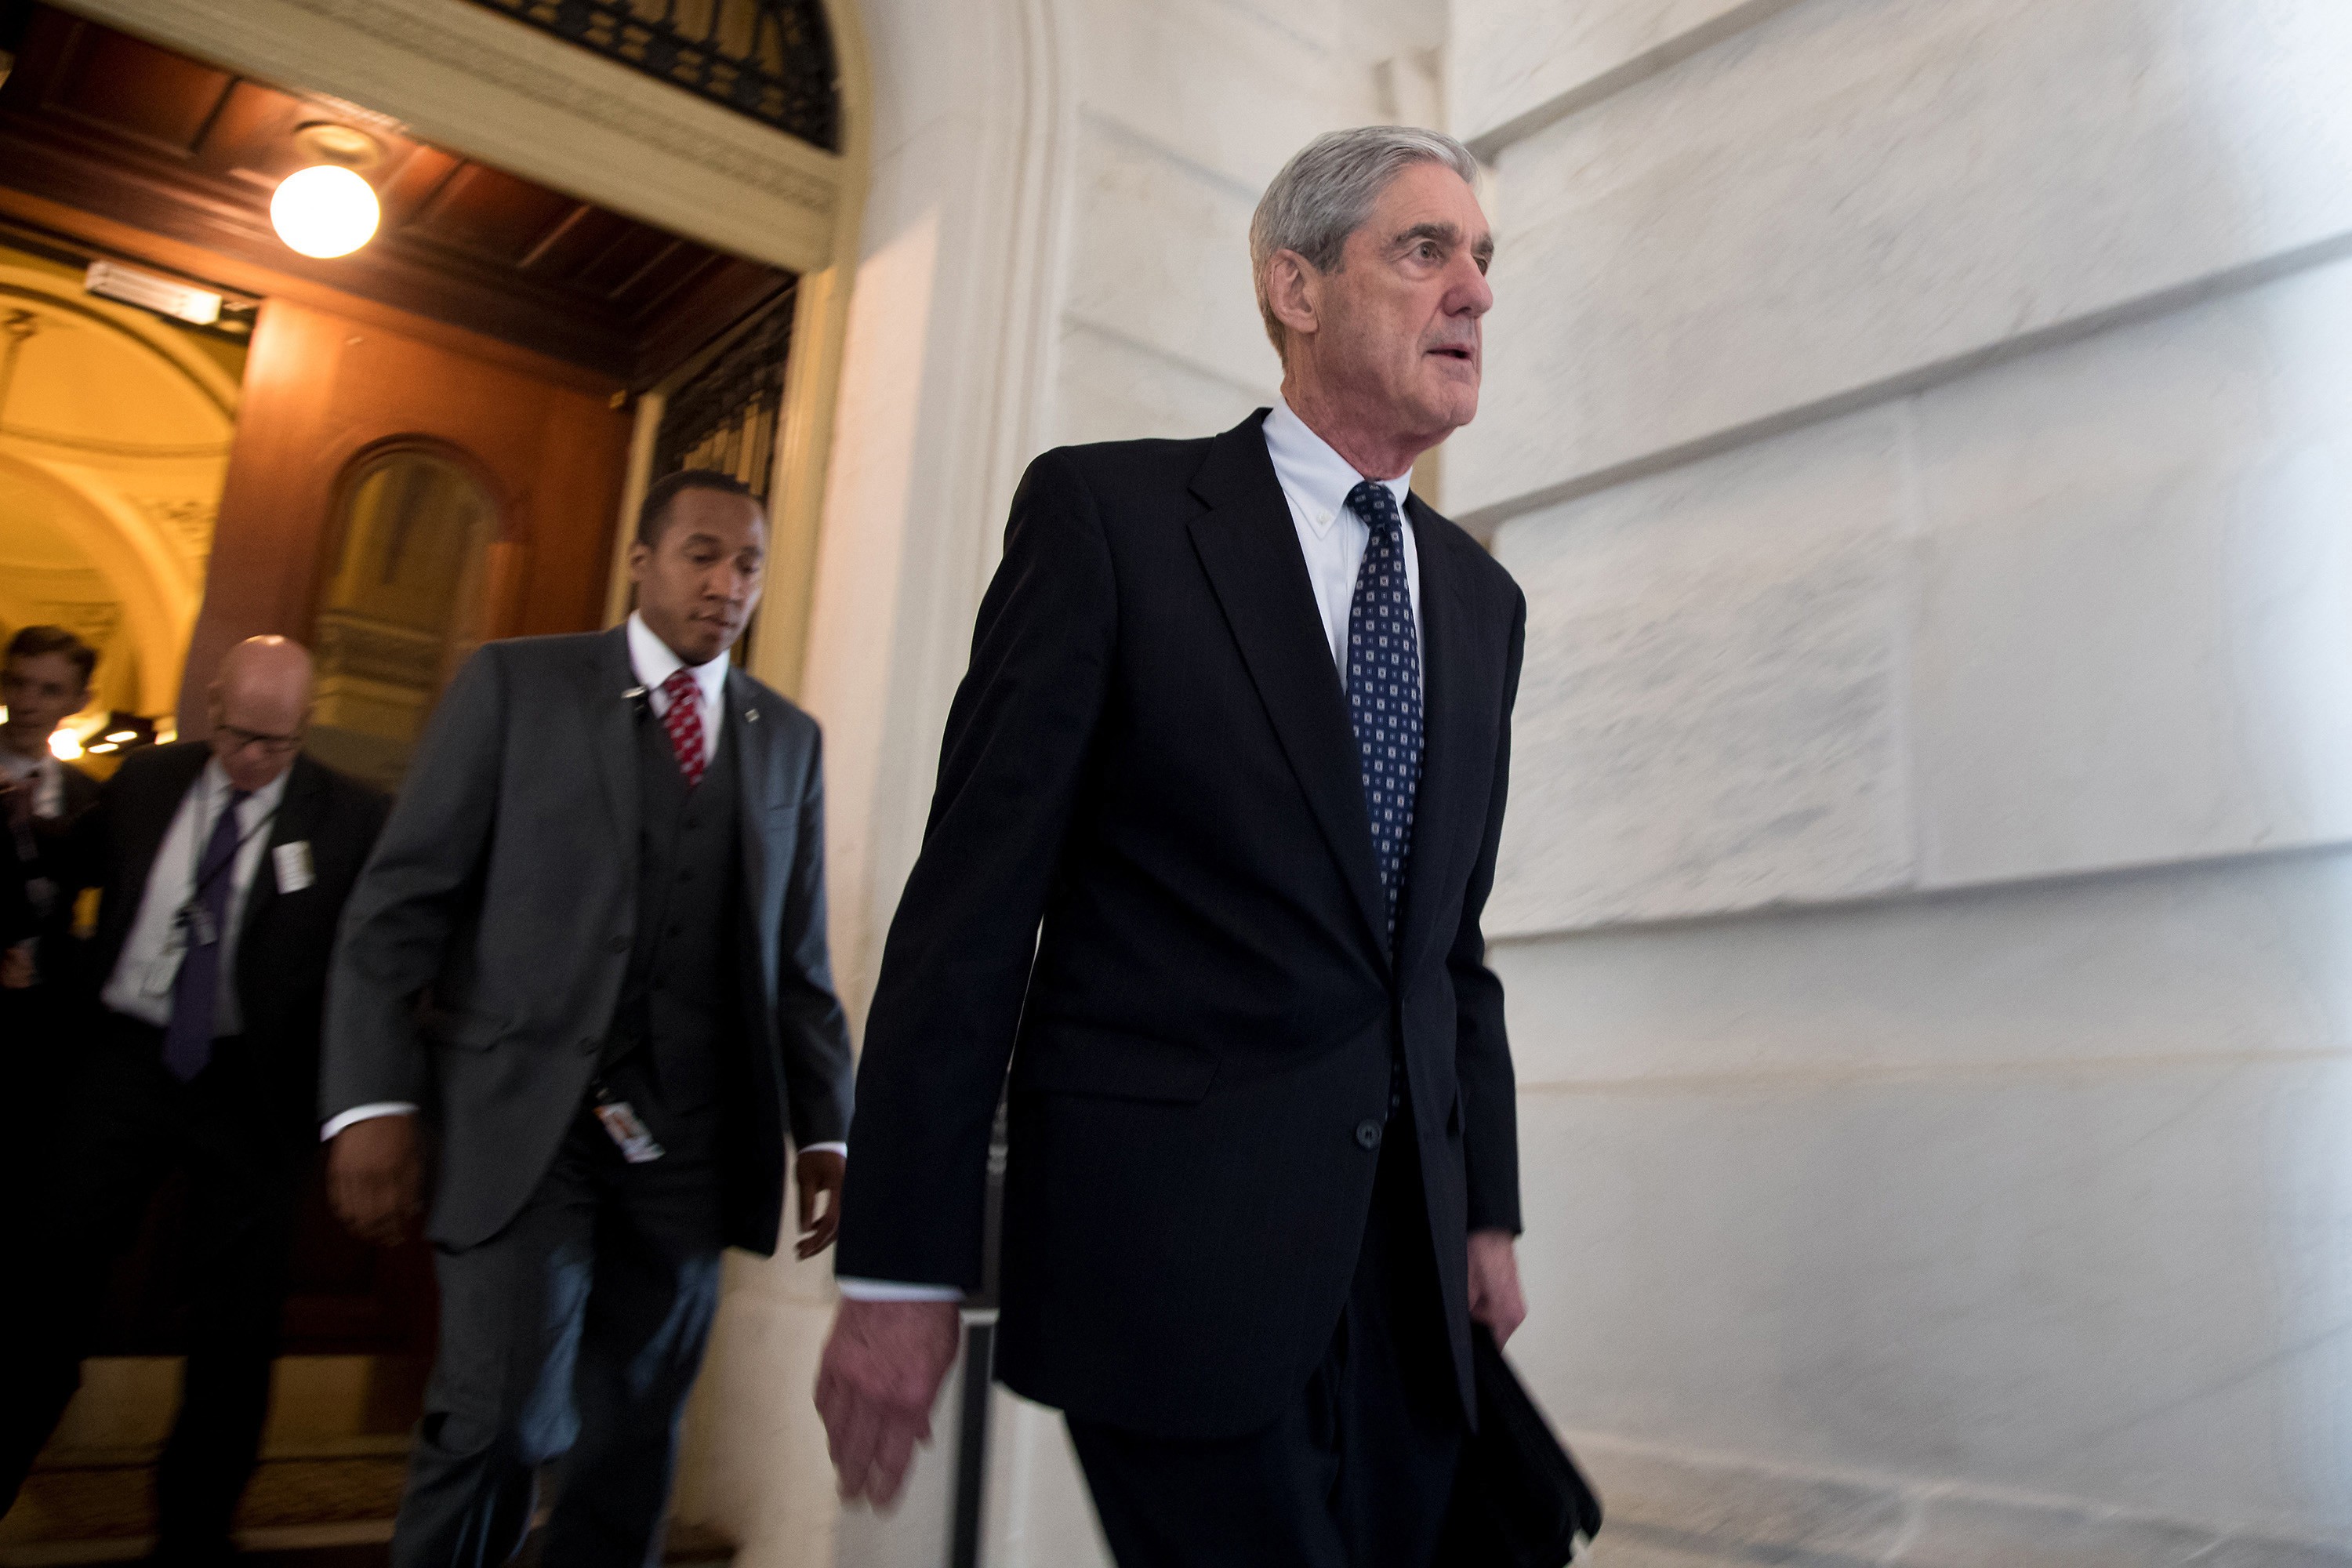 Robert Mueller, front, the special counsel probing Russian interference in the 2016 US election, leaves the Capitol building after meeting with the Senate Judiciary Committee on Capitol Hill on June 21, 2017. Photo: TNS